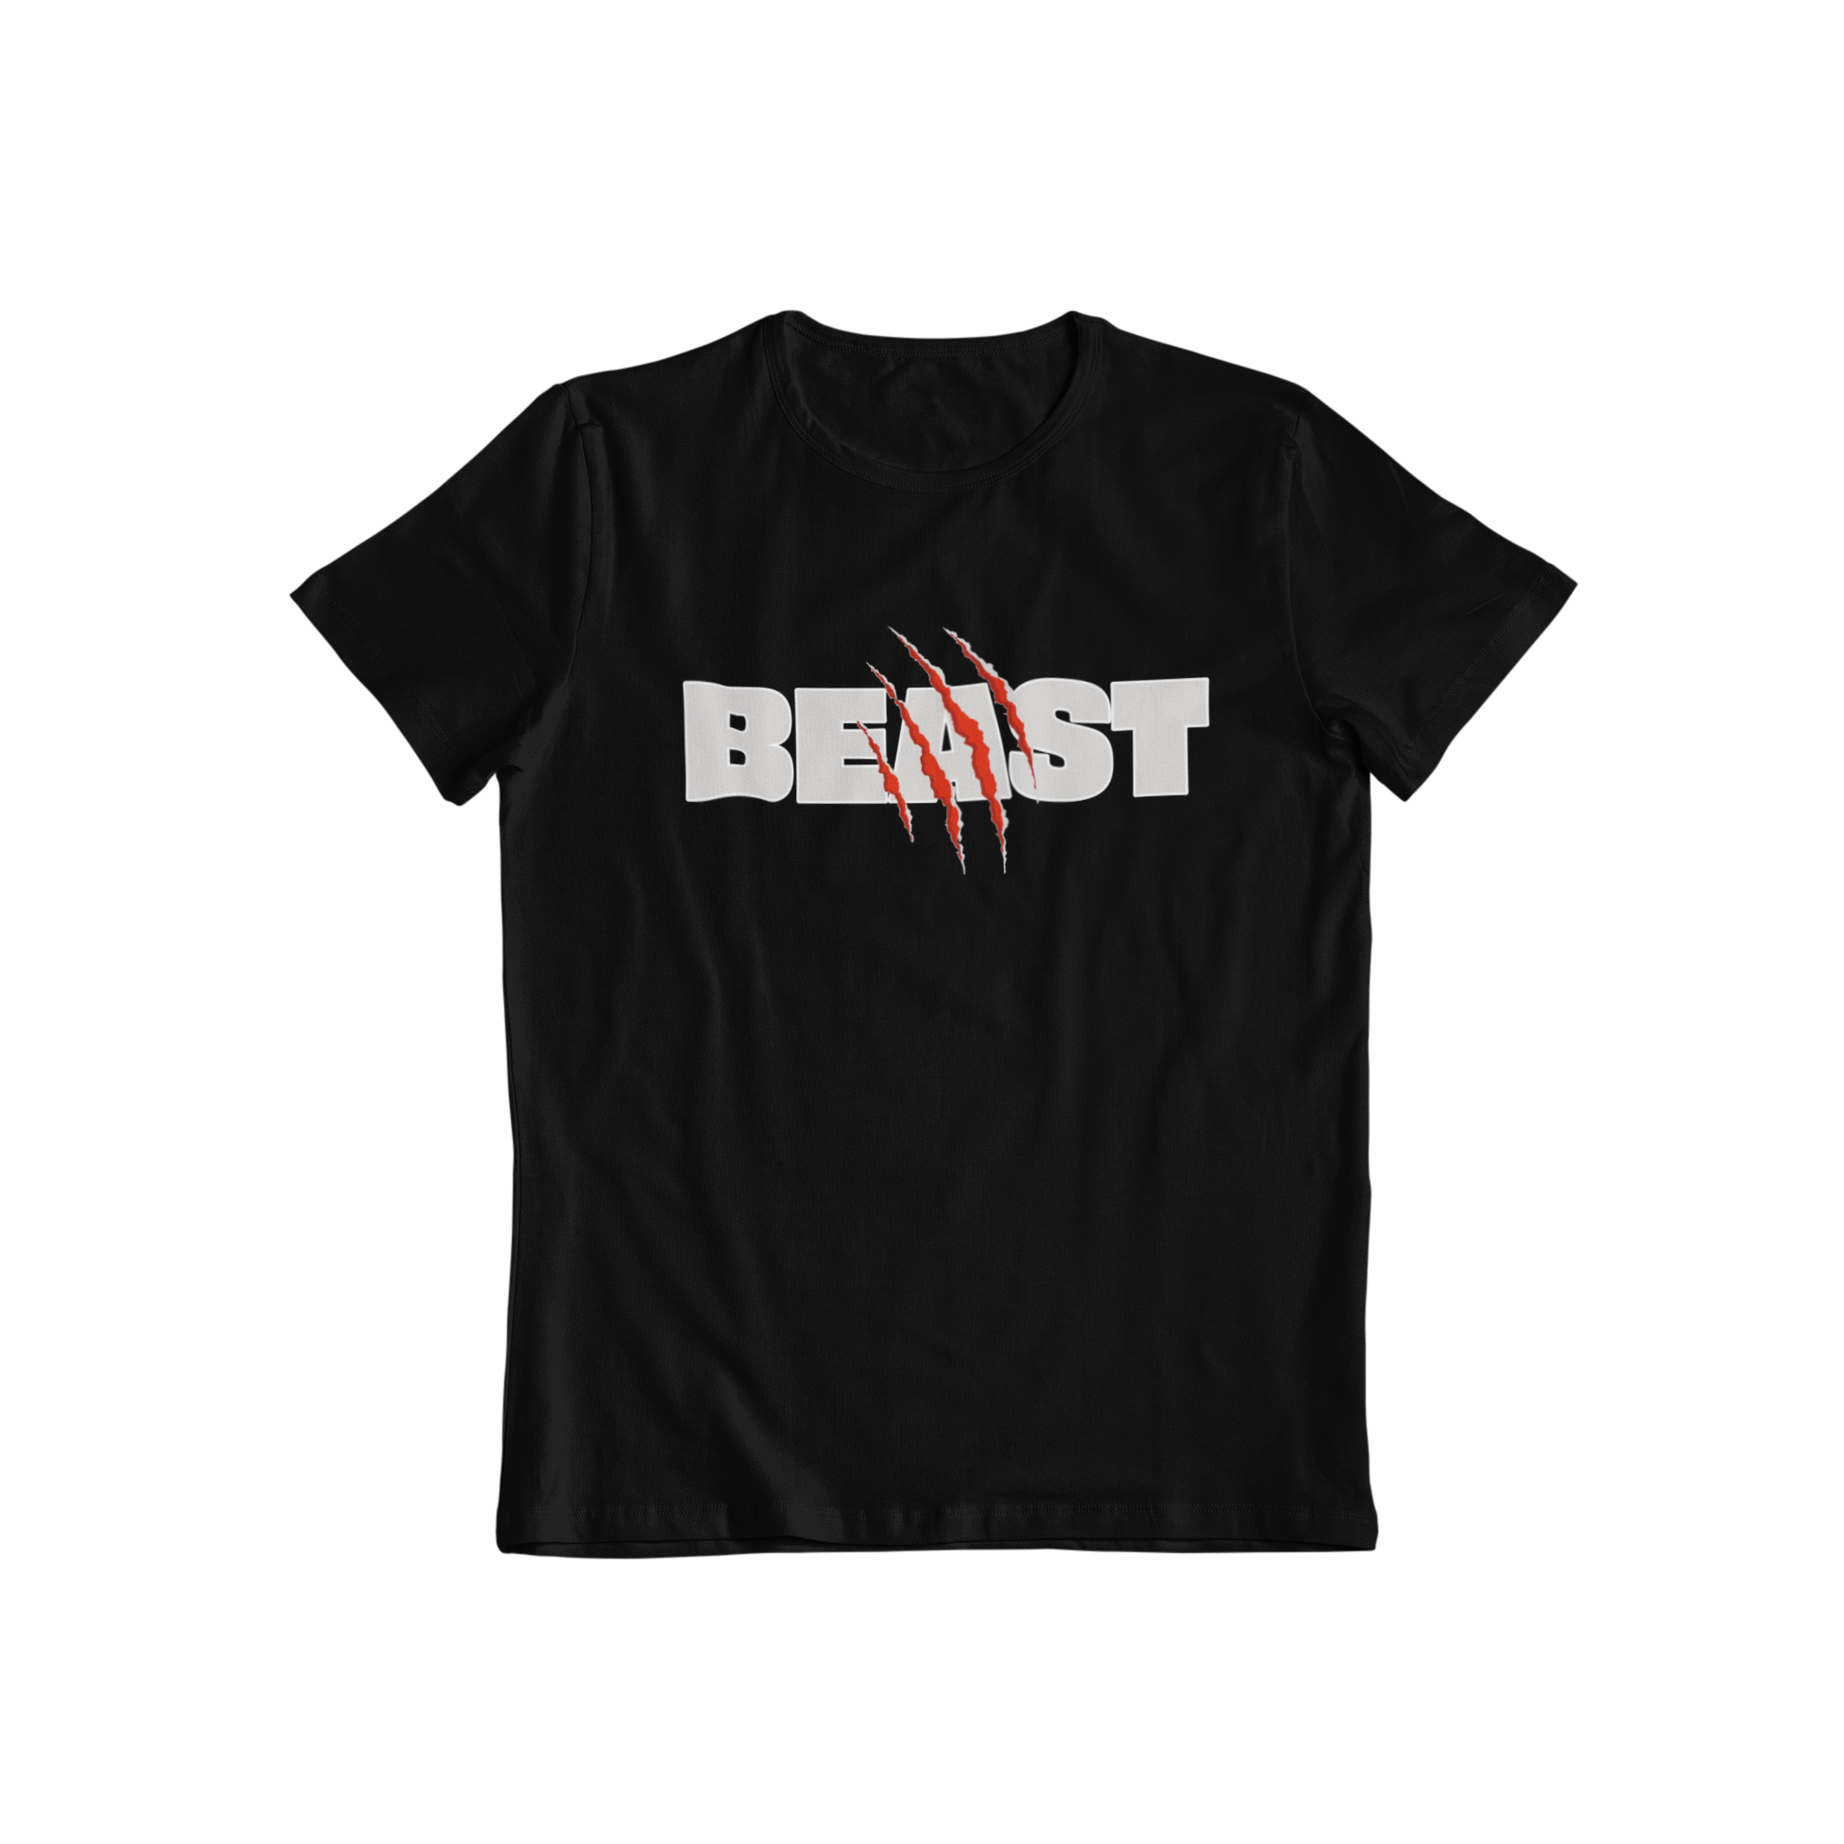 Enhance your wardrobe with our matching t-shirt, inspired by the classic tale of Beauty and the Beast. Made with the iconic Beast graphic, this t-shirt is the perfect way to show off your love for the story while staying stylish and comfortable.